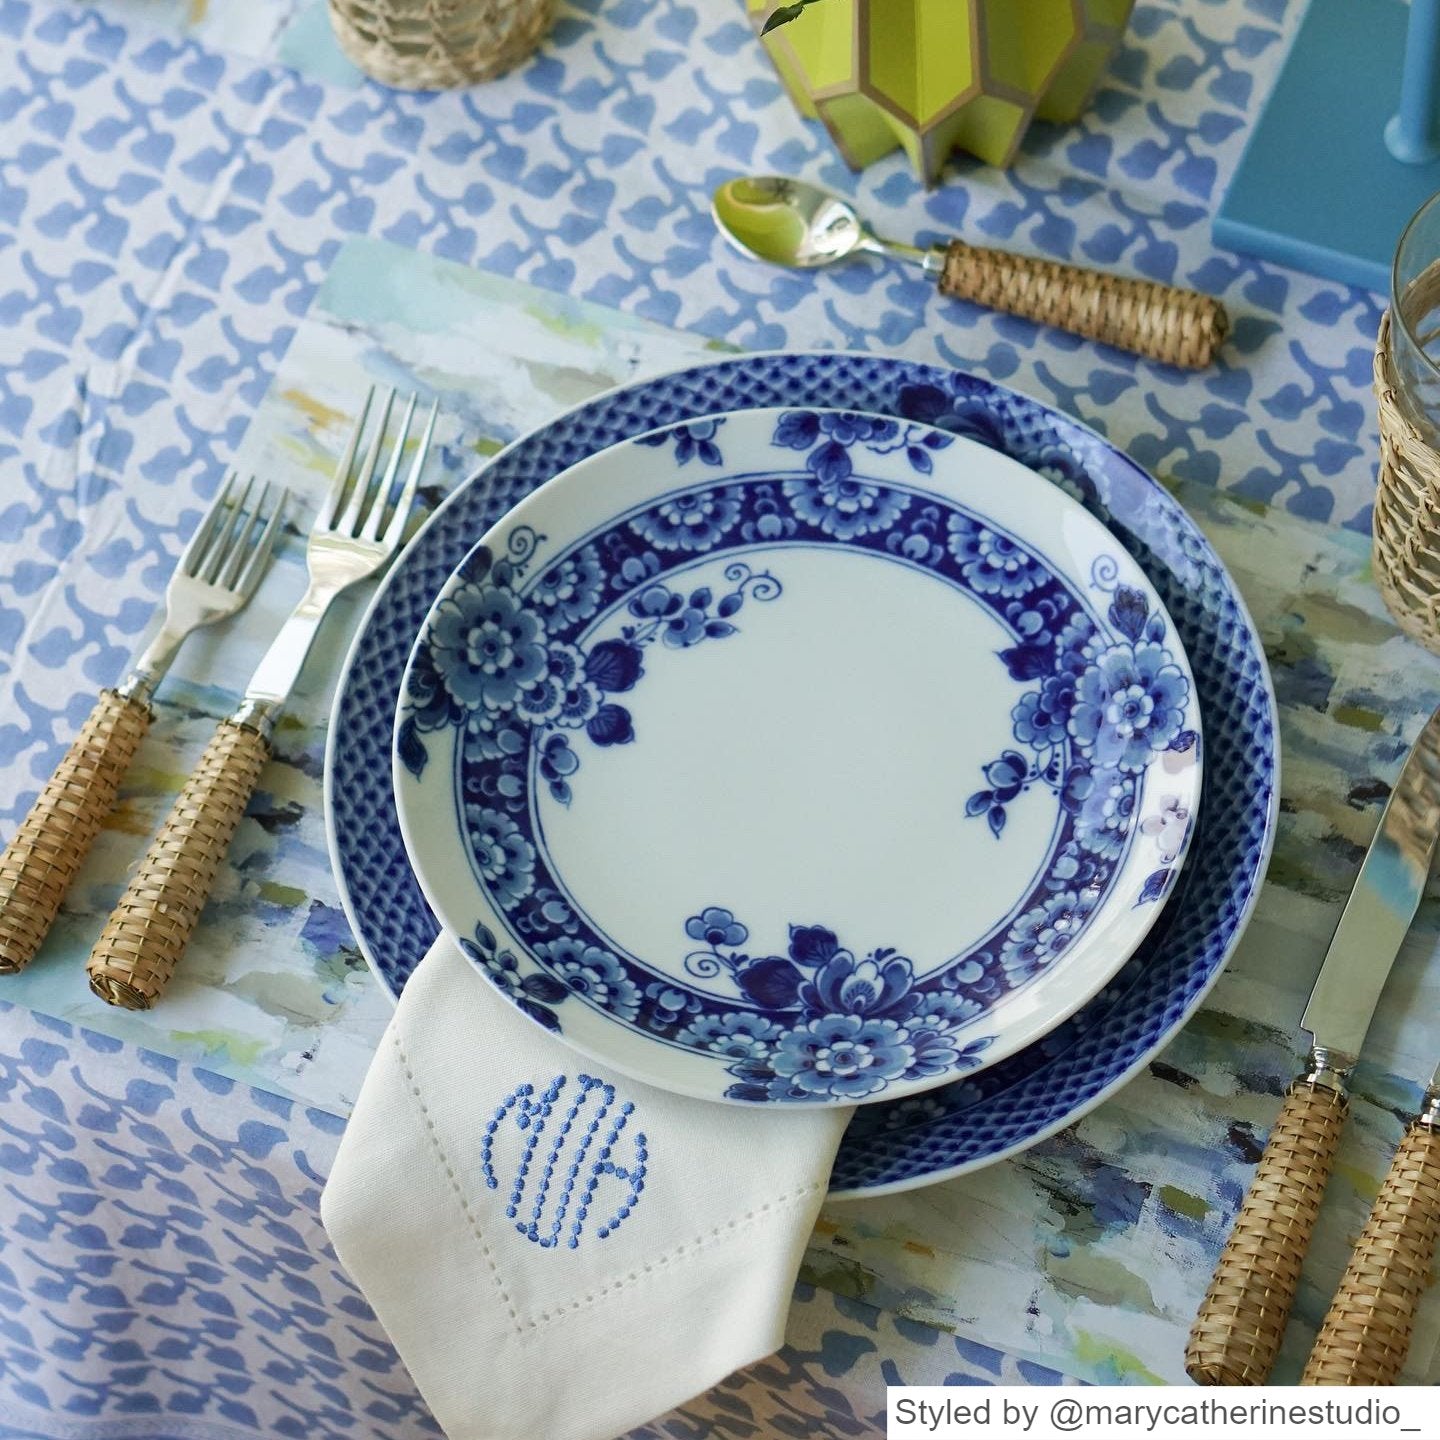 Blue and gray watercolor paper placemat layered with blue and white plates on a blue and white tablecloth